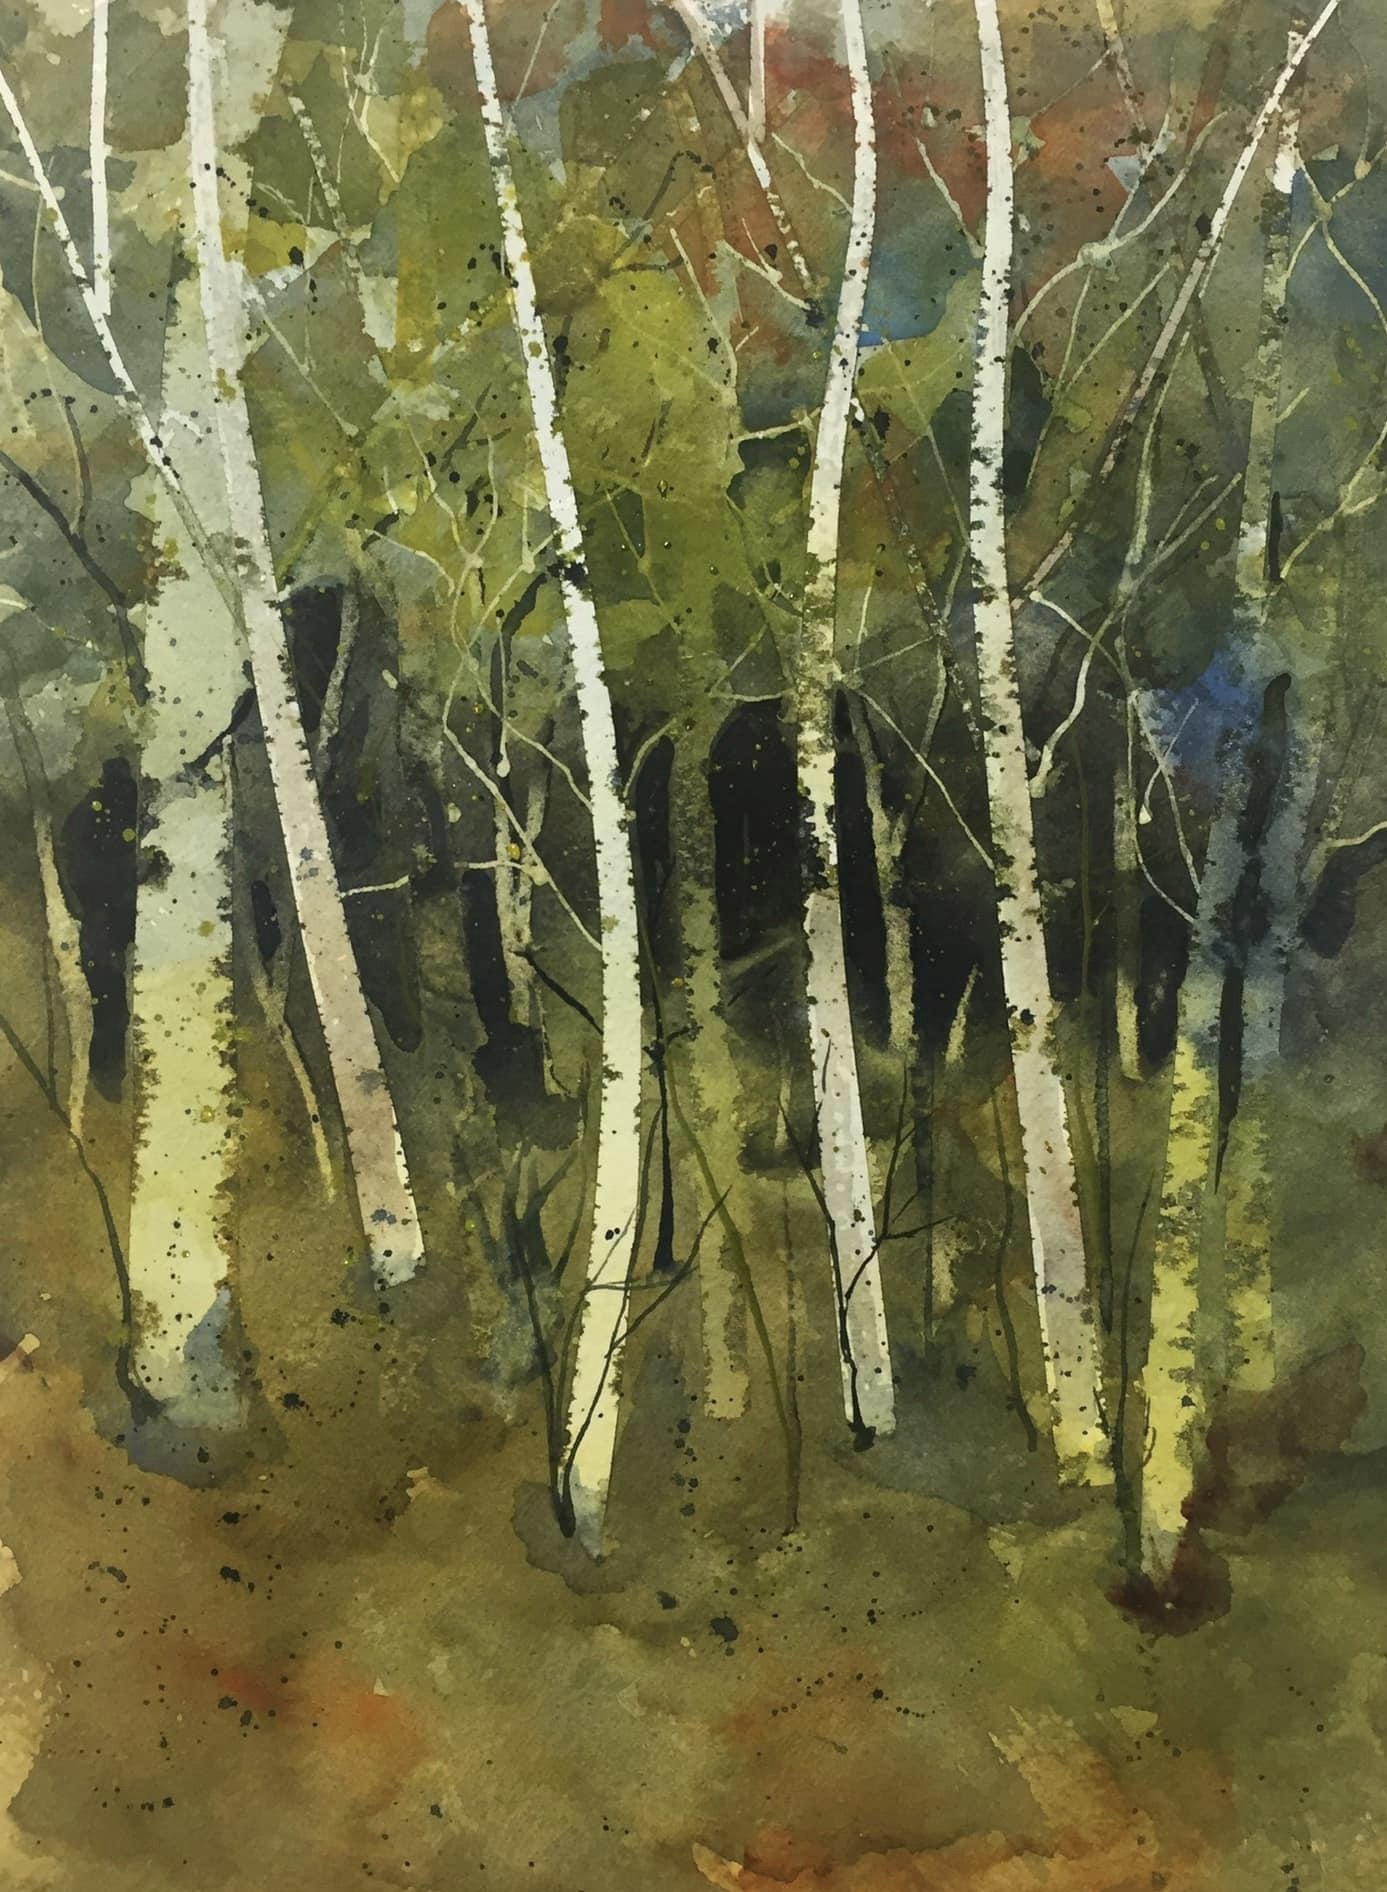    Whimsical Forest  , 15” x 11”, watercolor on paper 